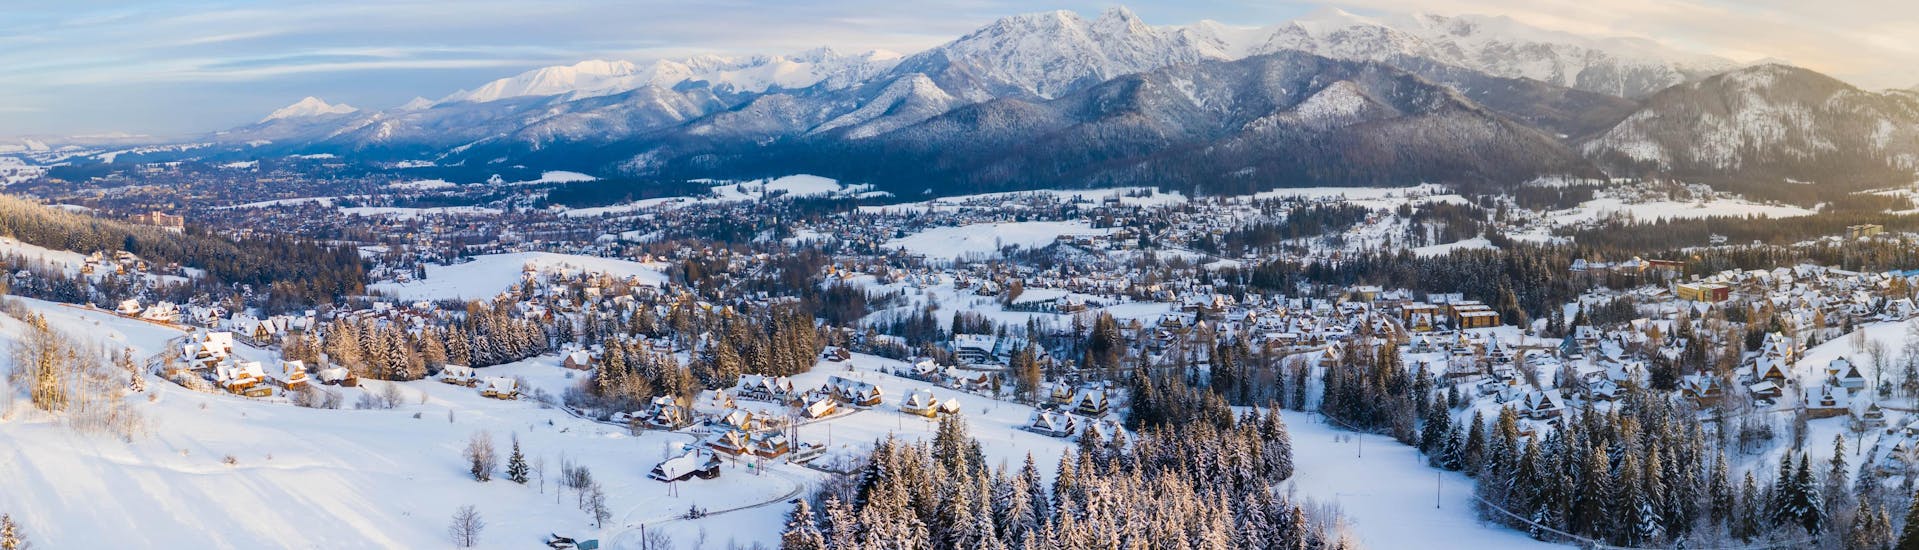 View of the snowy landscape of the village of Zakopane in Poland, where local ski schools offer their ski lessons.